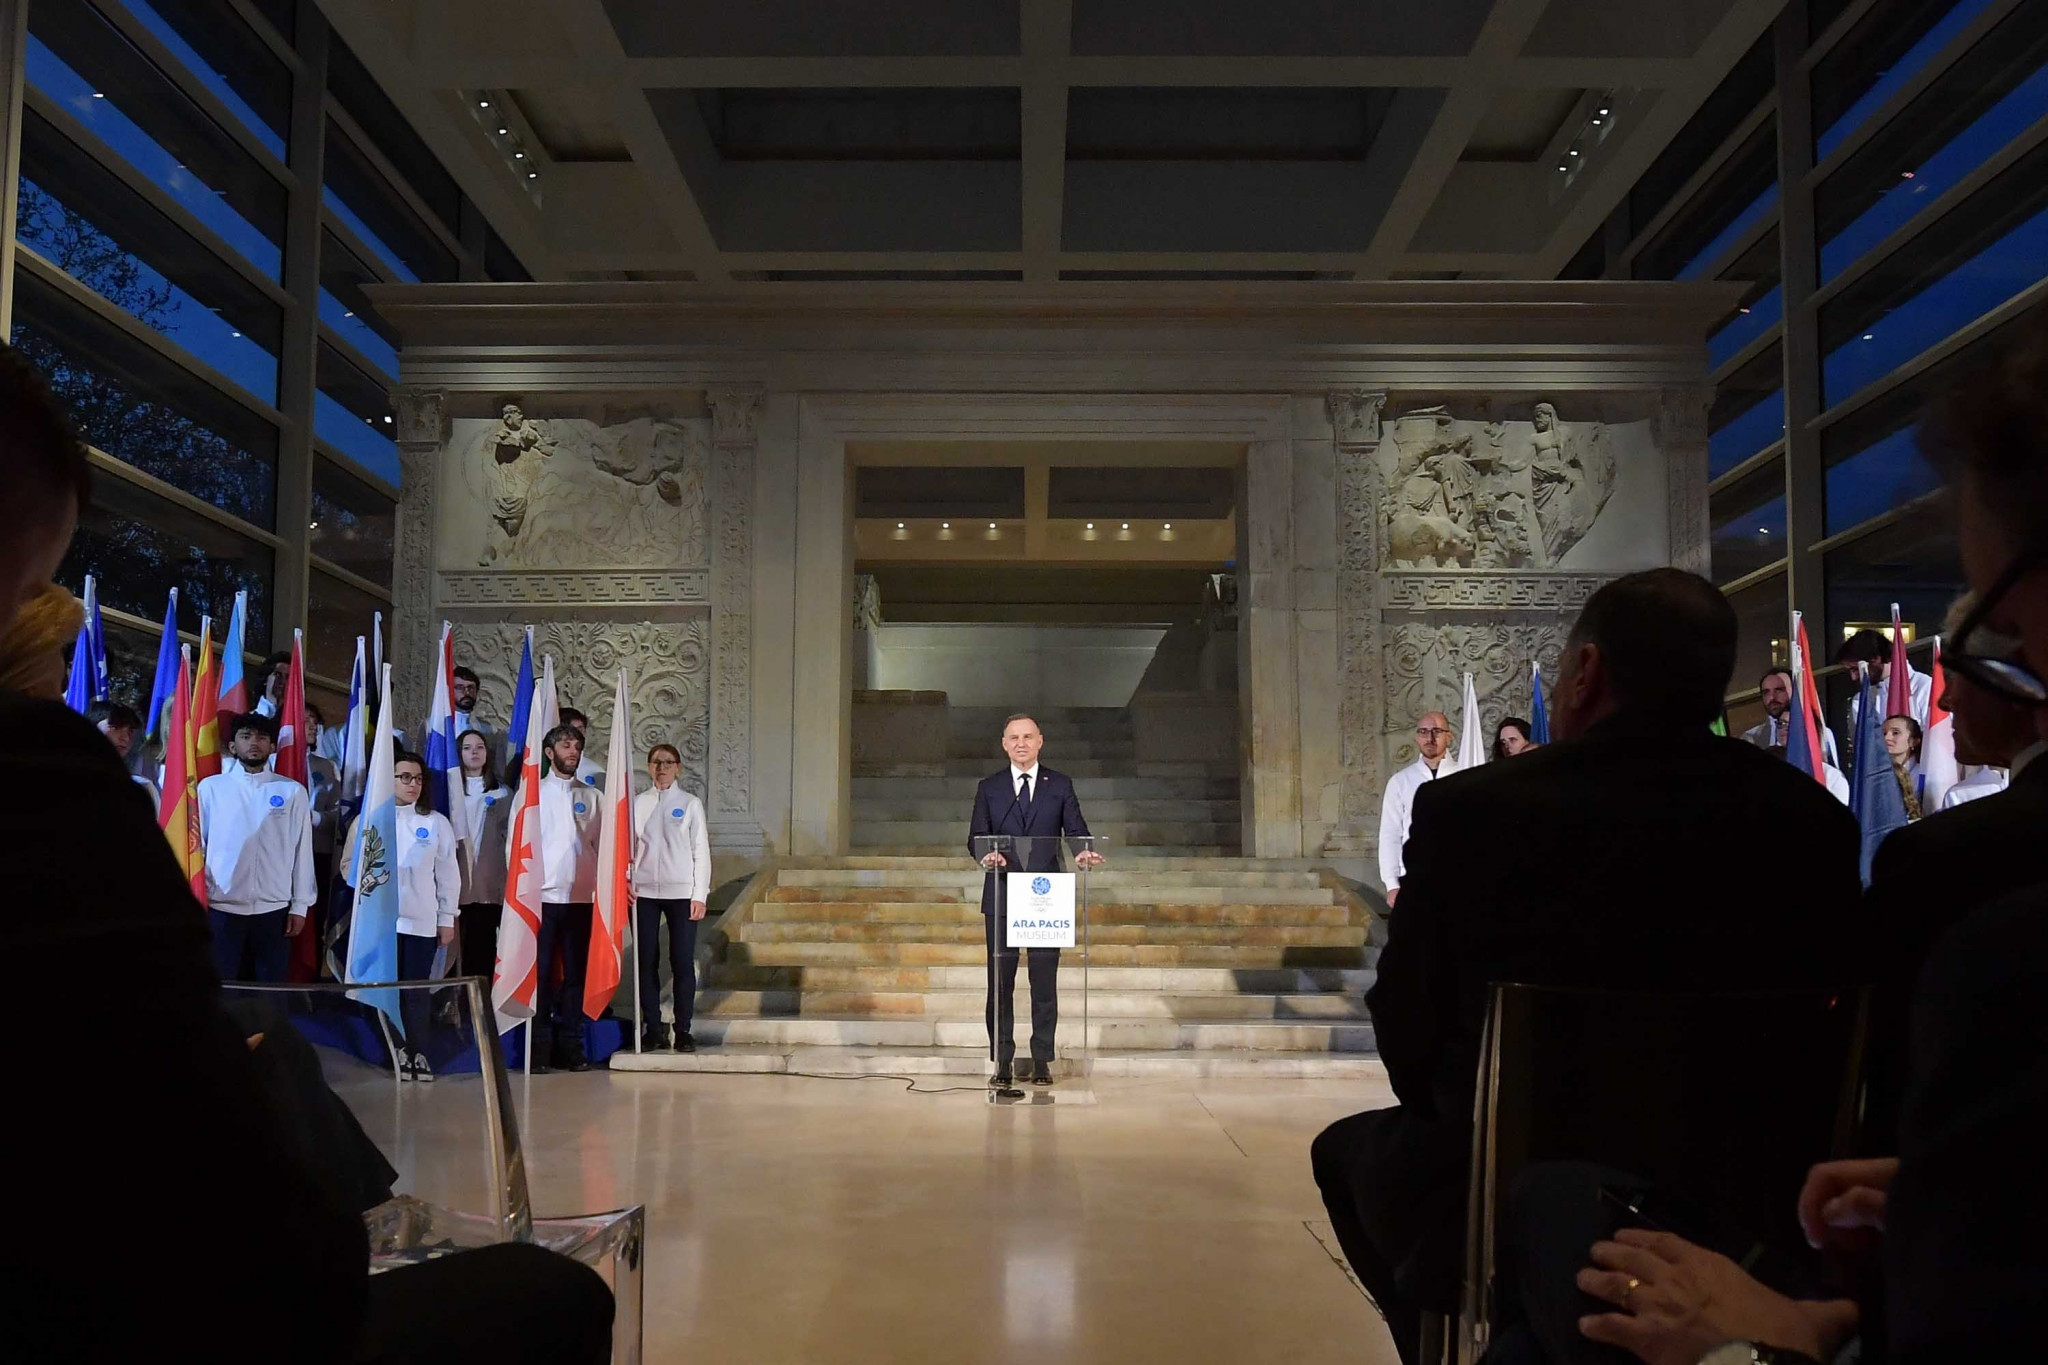 Spectators watched on at the Ara Pacis Museum as Polish President Andrzej Duda gave his speech ©EOC